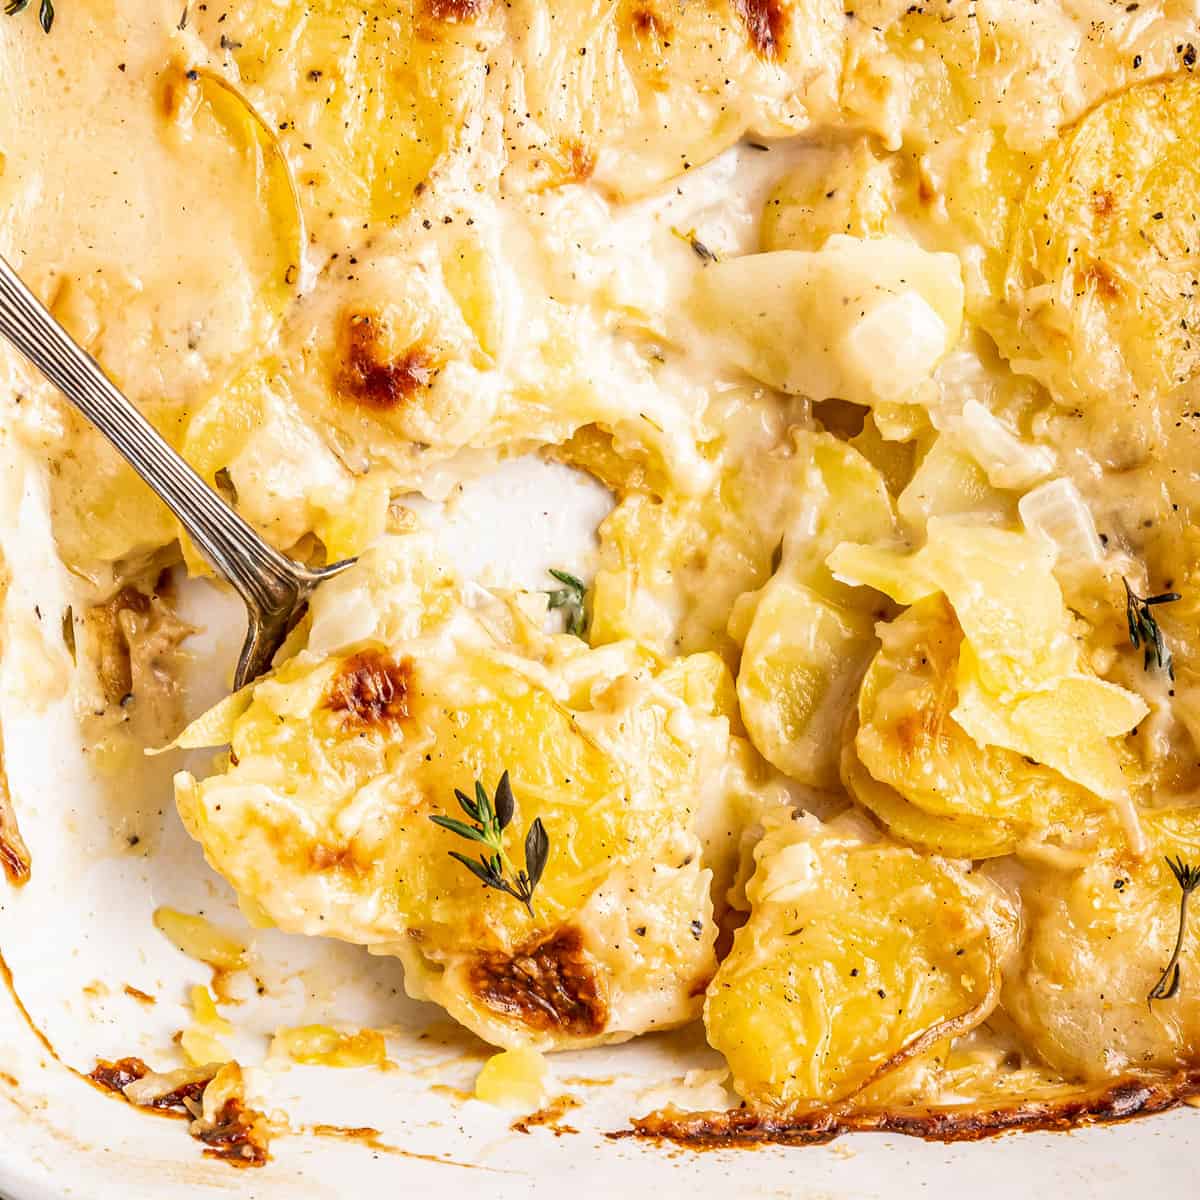 https://www.thechunkychef.com/wp-content/uploads/2022/10/Classic-Scalloped-Potatoes-recipe-card.jpg